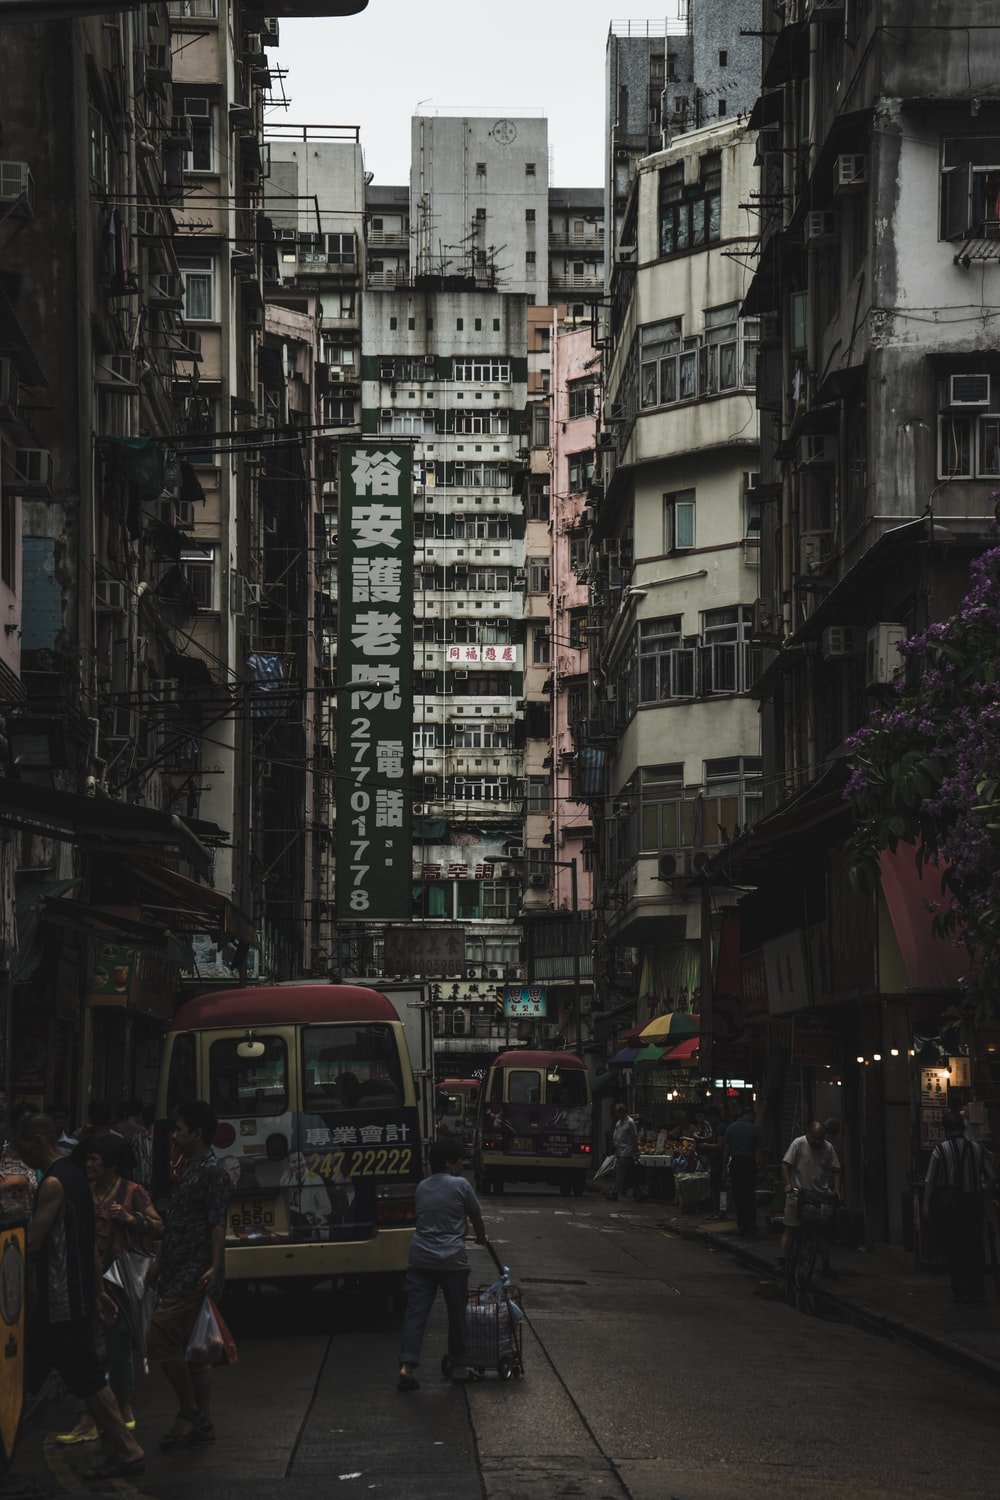 Kowloon Picture. Download Free Image